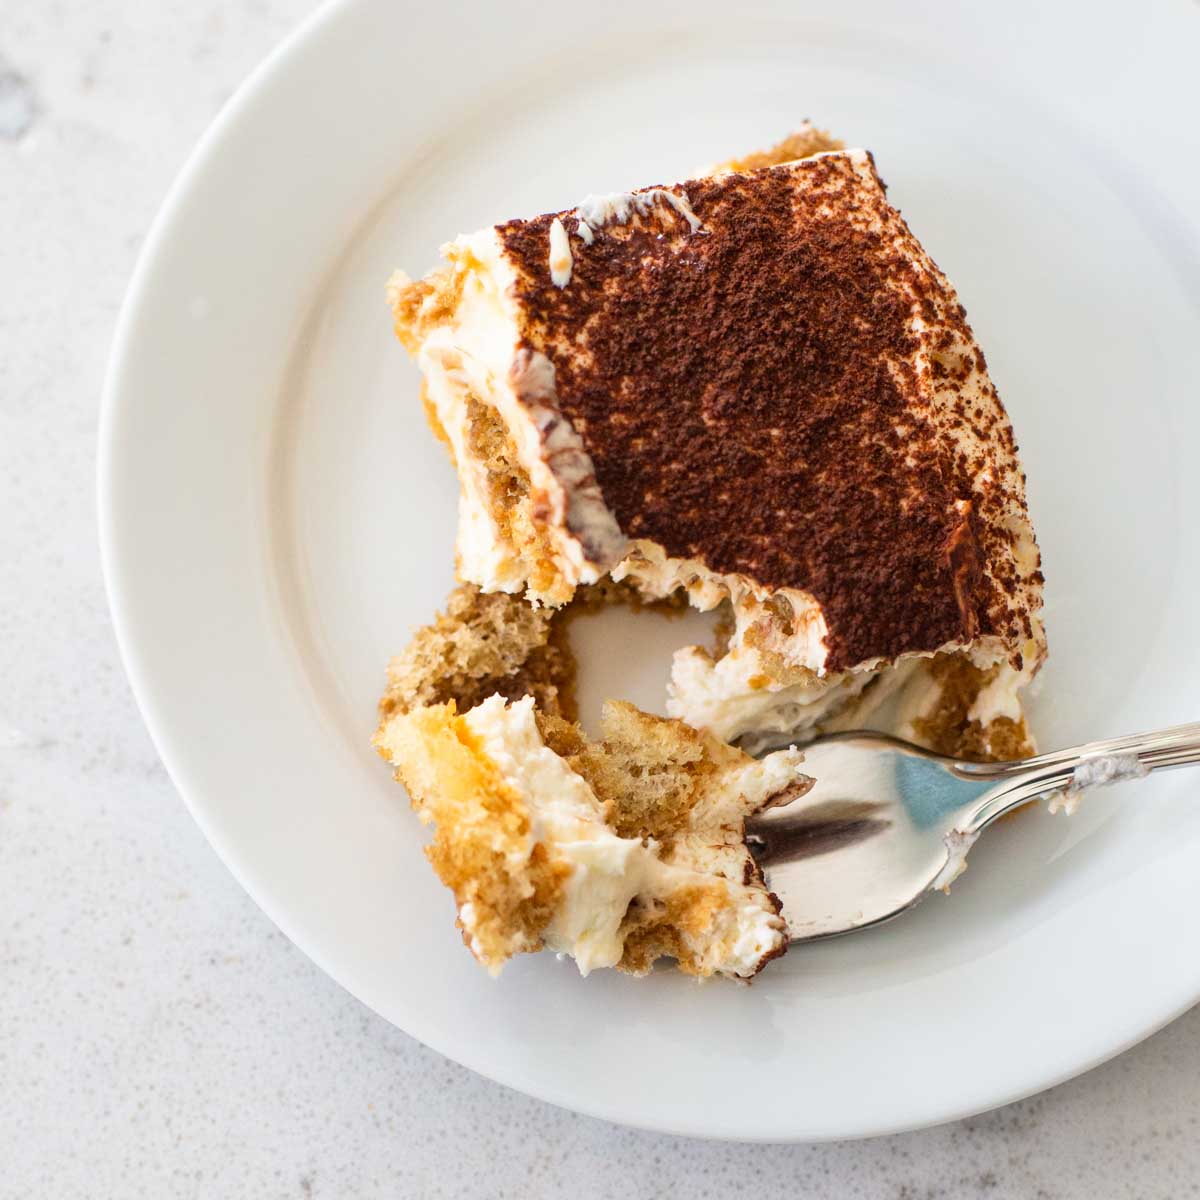 A slice of tiramisu is on a white plate, a spoon has a bite on it showing the cream filling and spongey cookie layer.